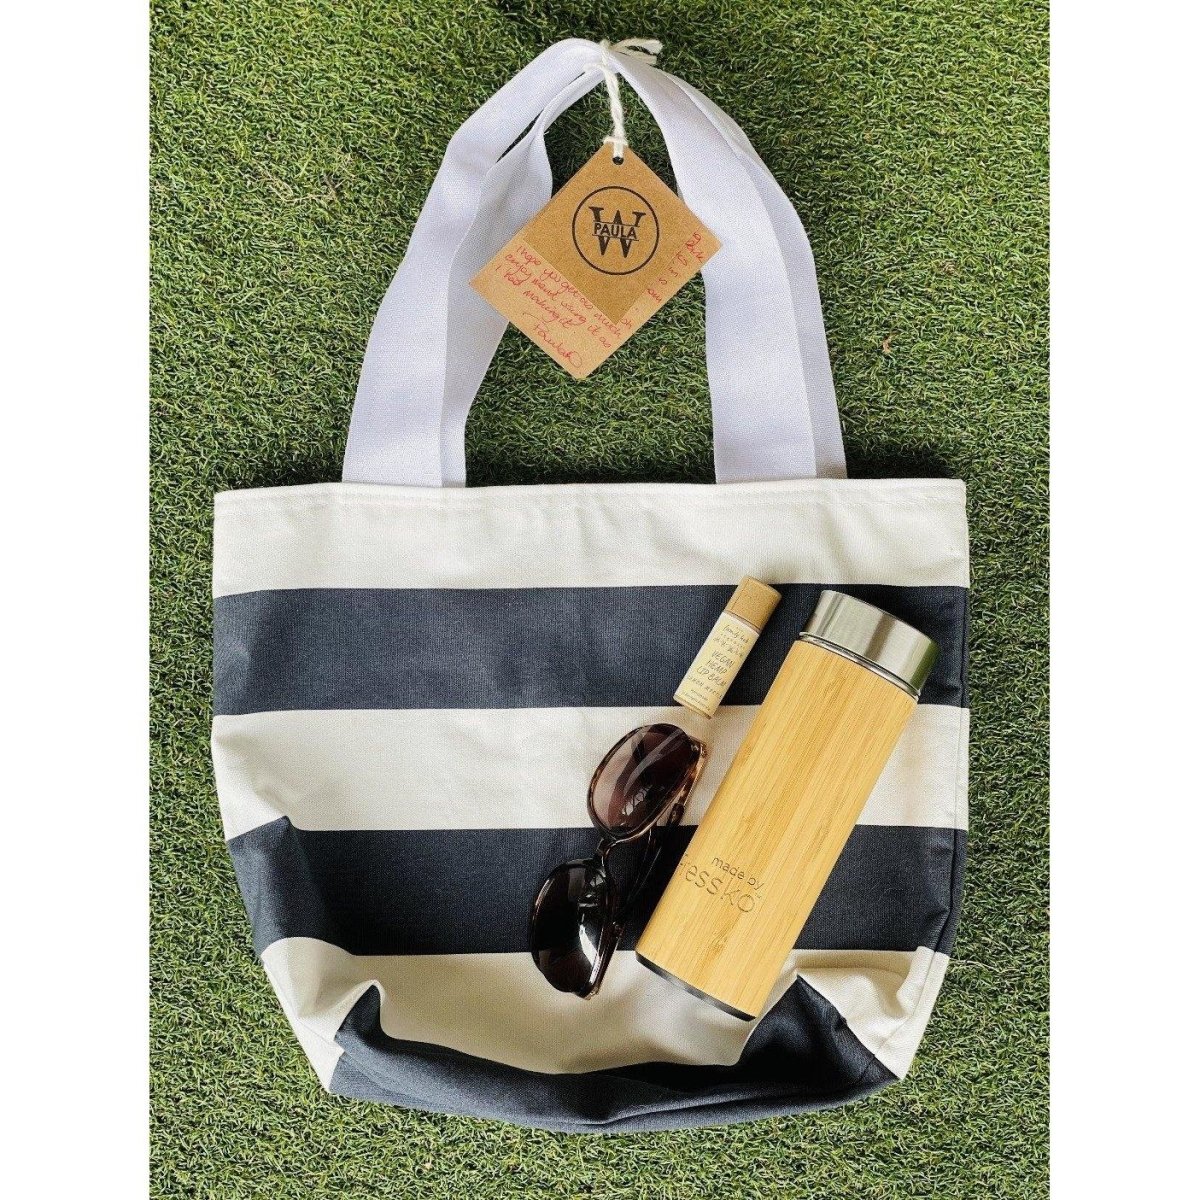 100% Upcycled Fabric Tote Bag by Paula W - Urban Revolution